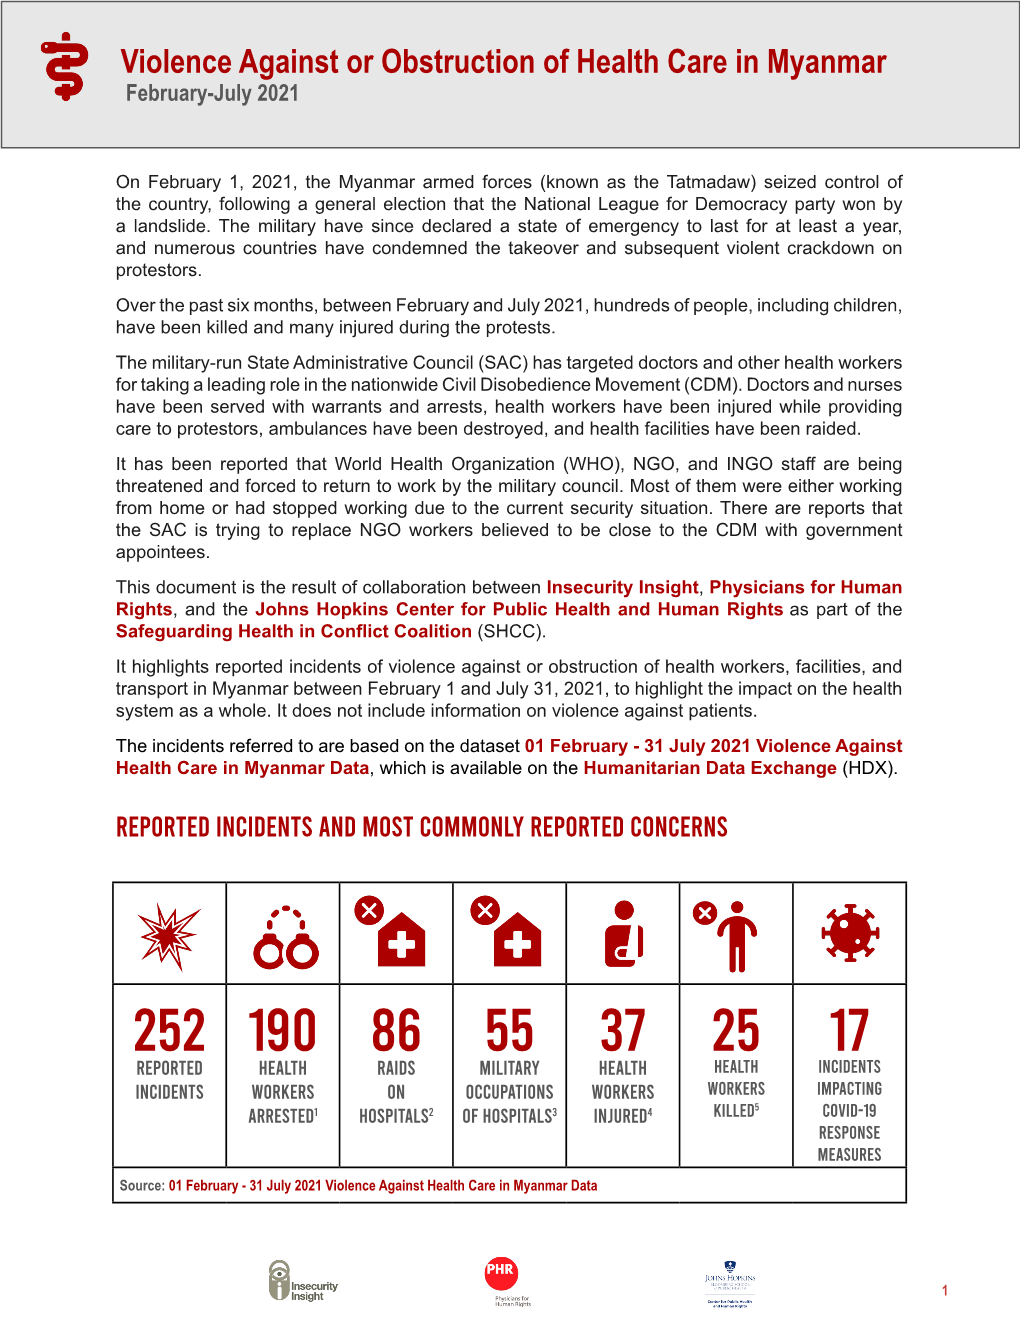 Violence Against Or Obstruction of Health Care in Myanmar February-July 2021